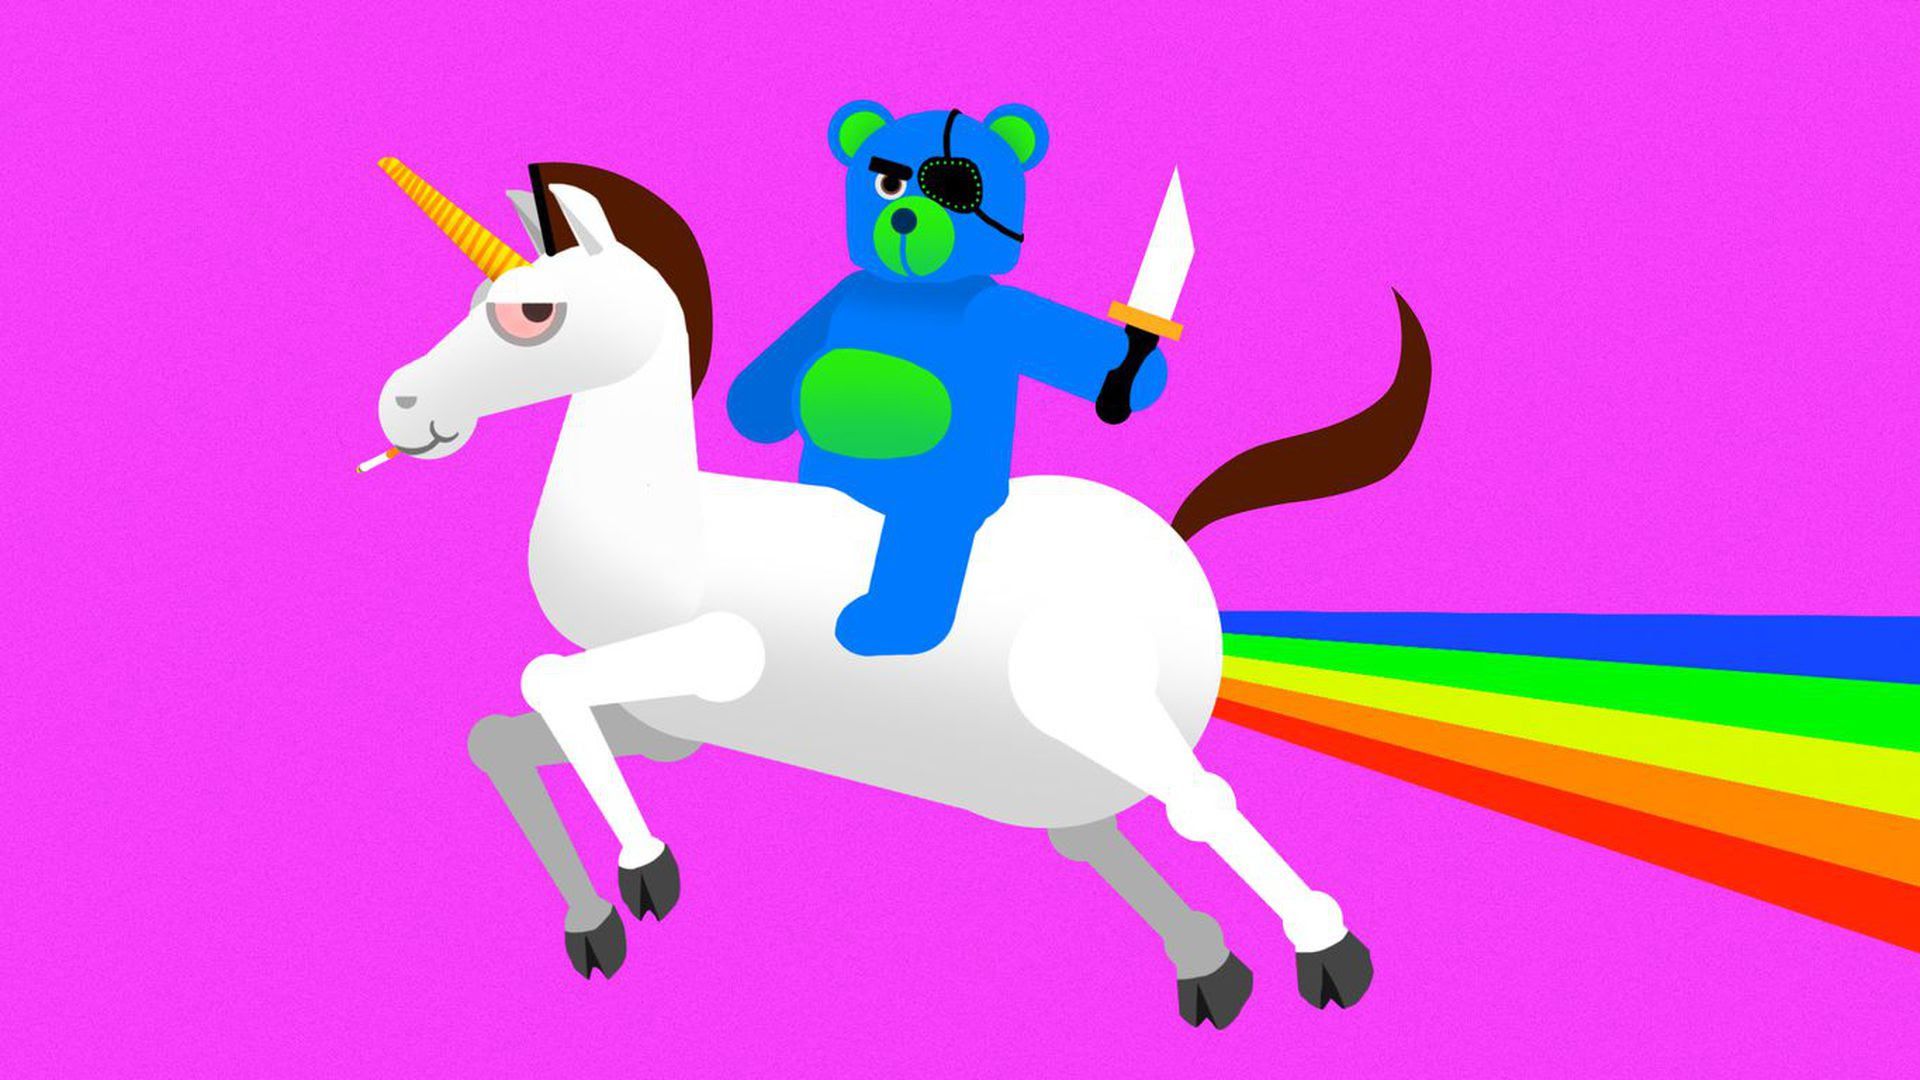 A child-like illustration of a bear on a unicorn with a rainbow in the background. 